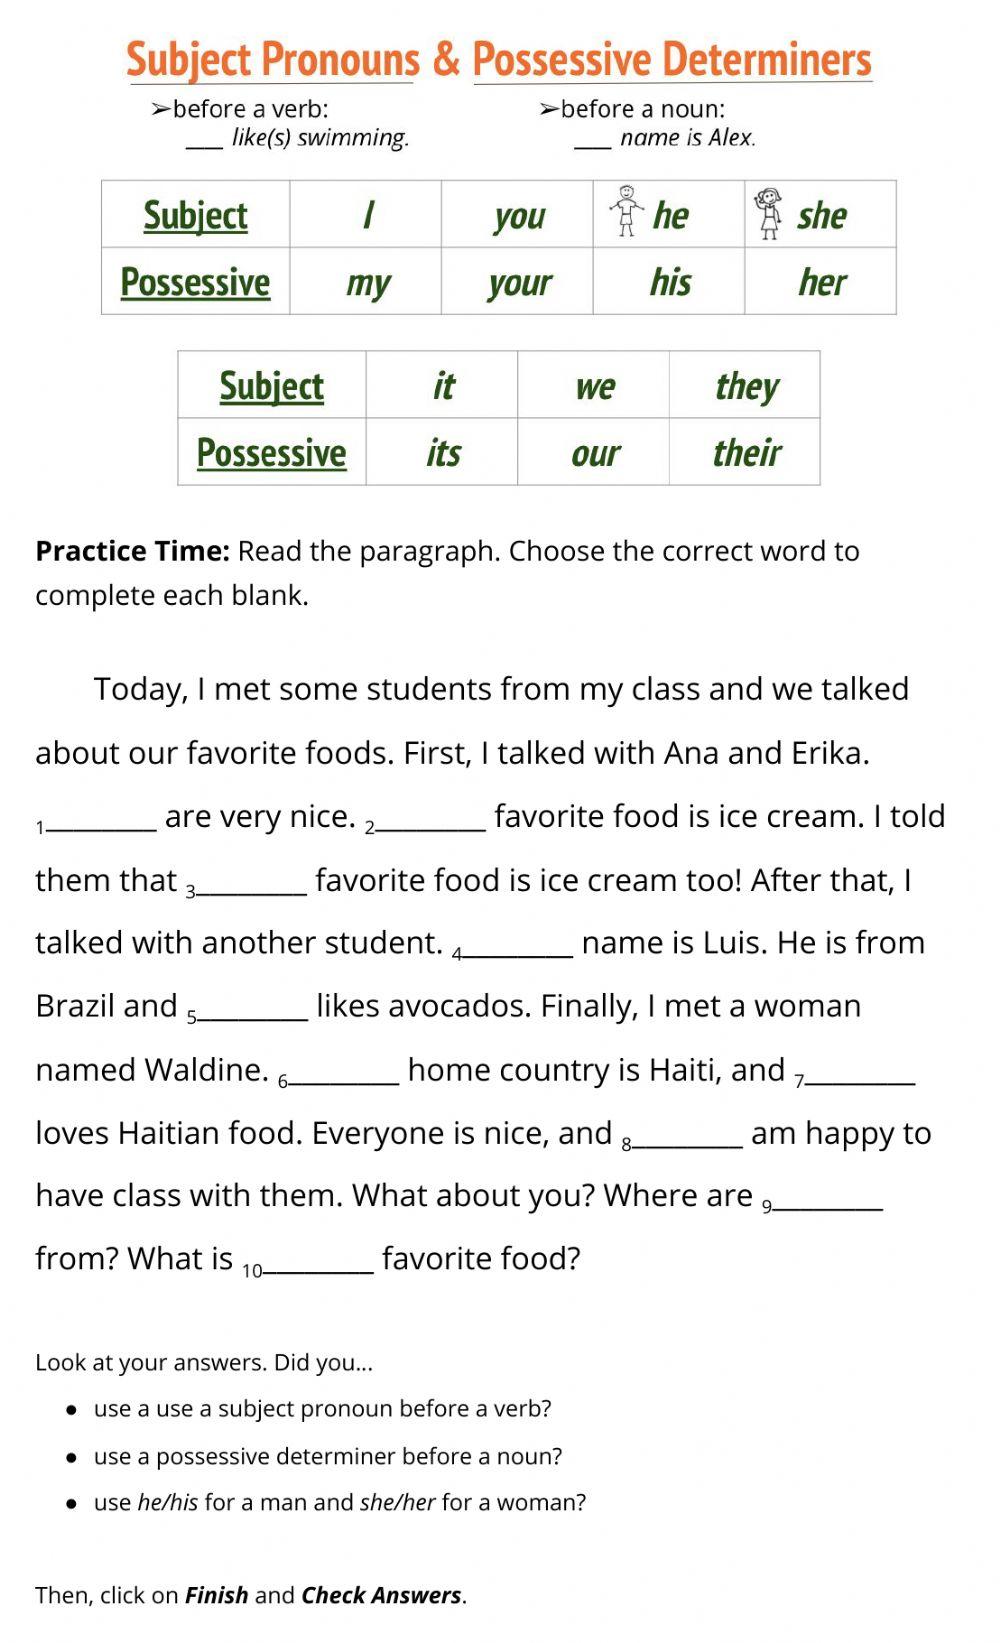 Subject Pronouns & Possessive Determiners - Meeting New Students